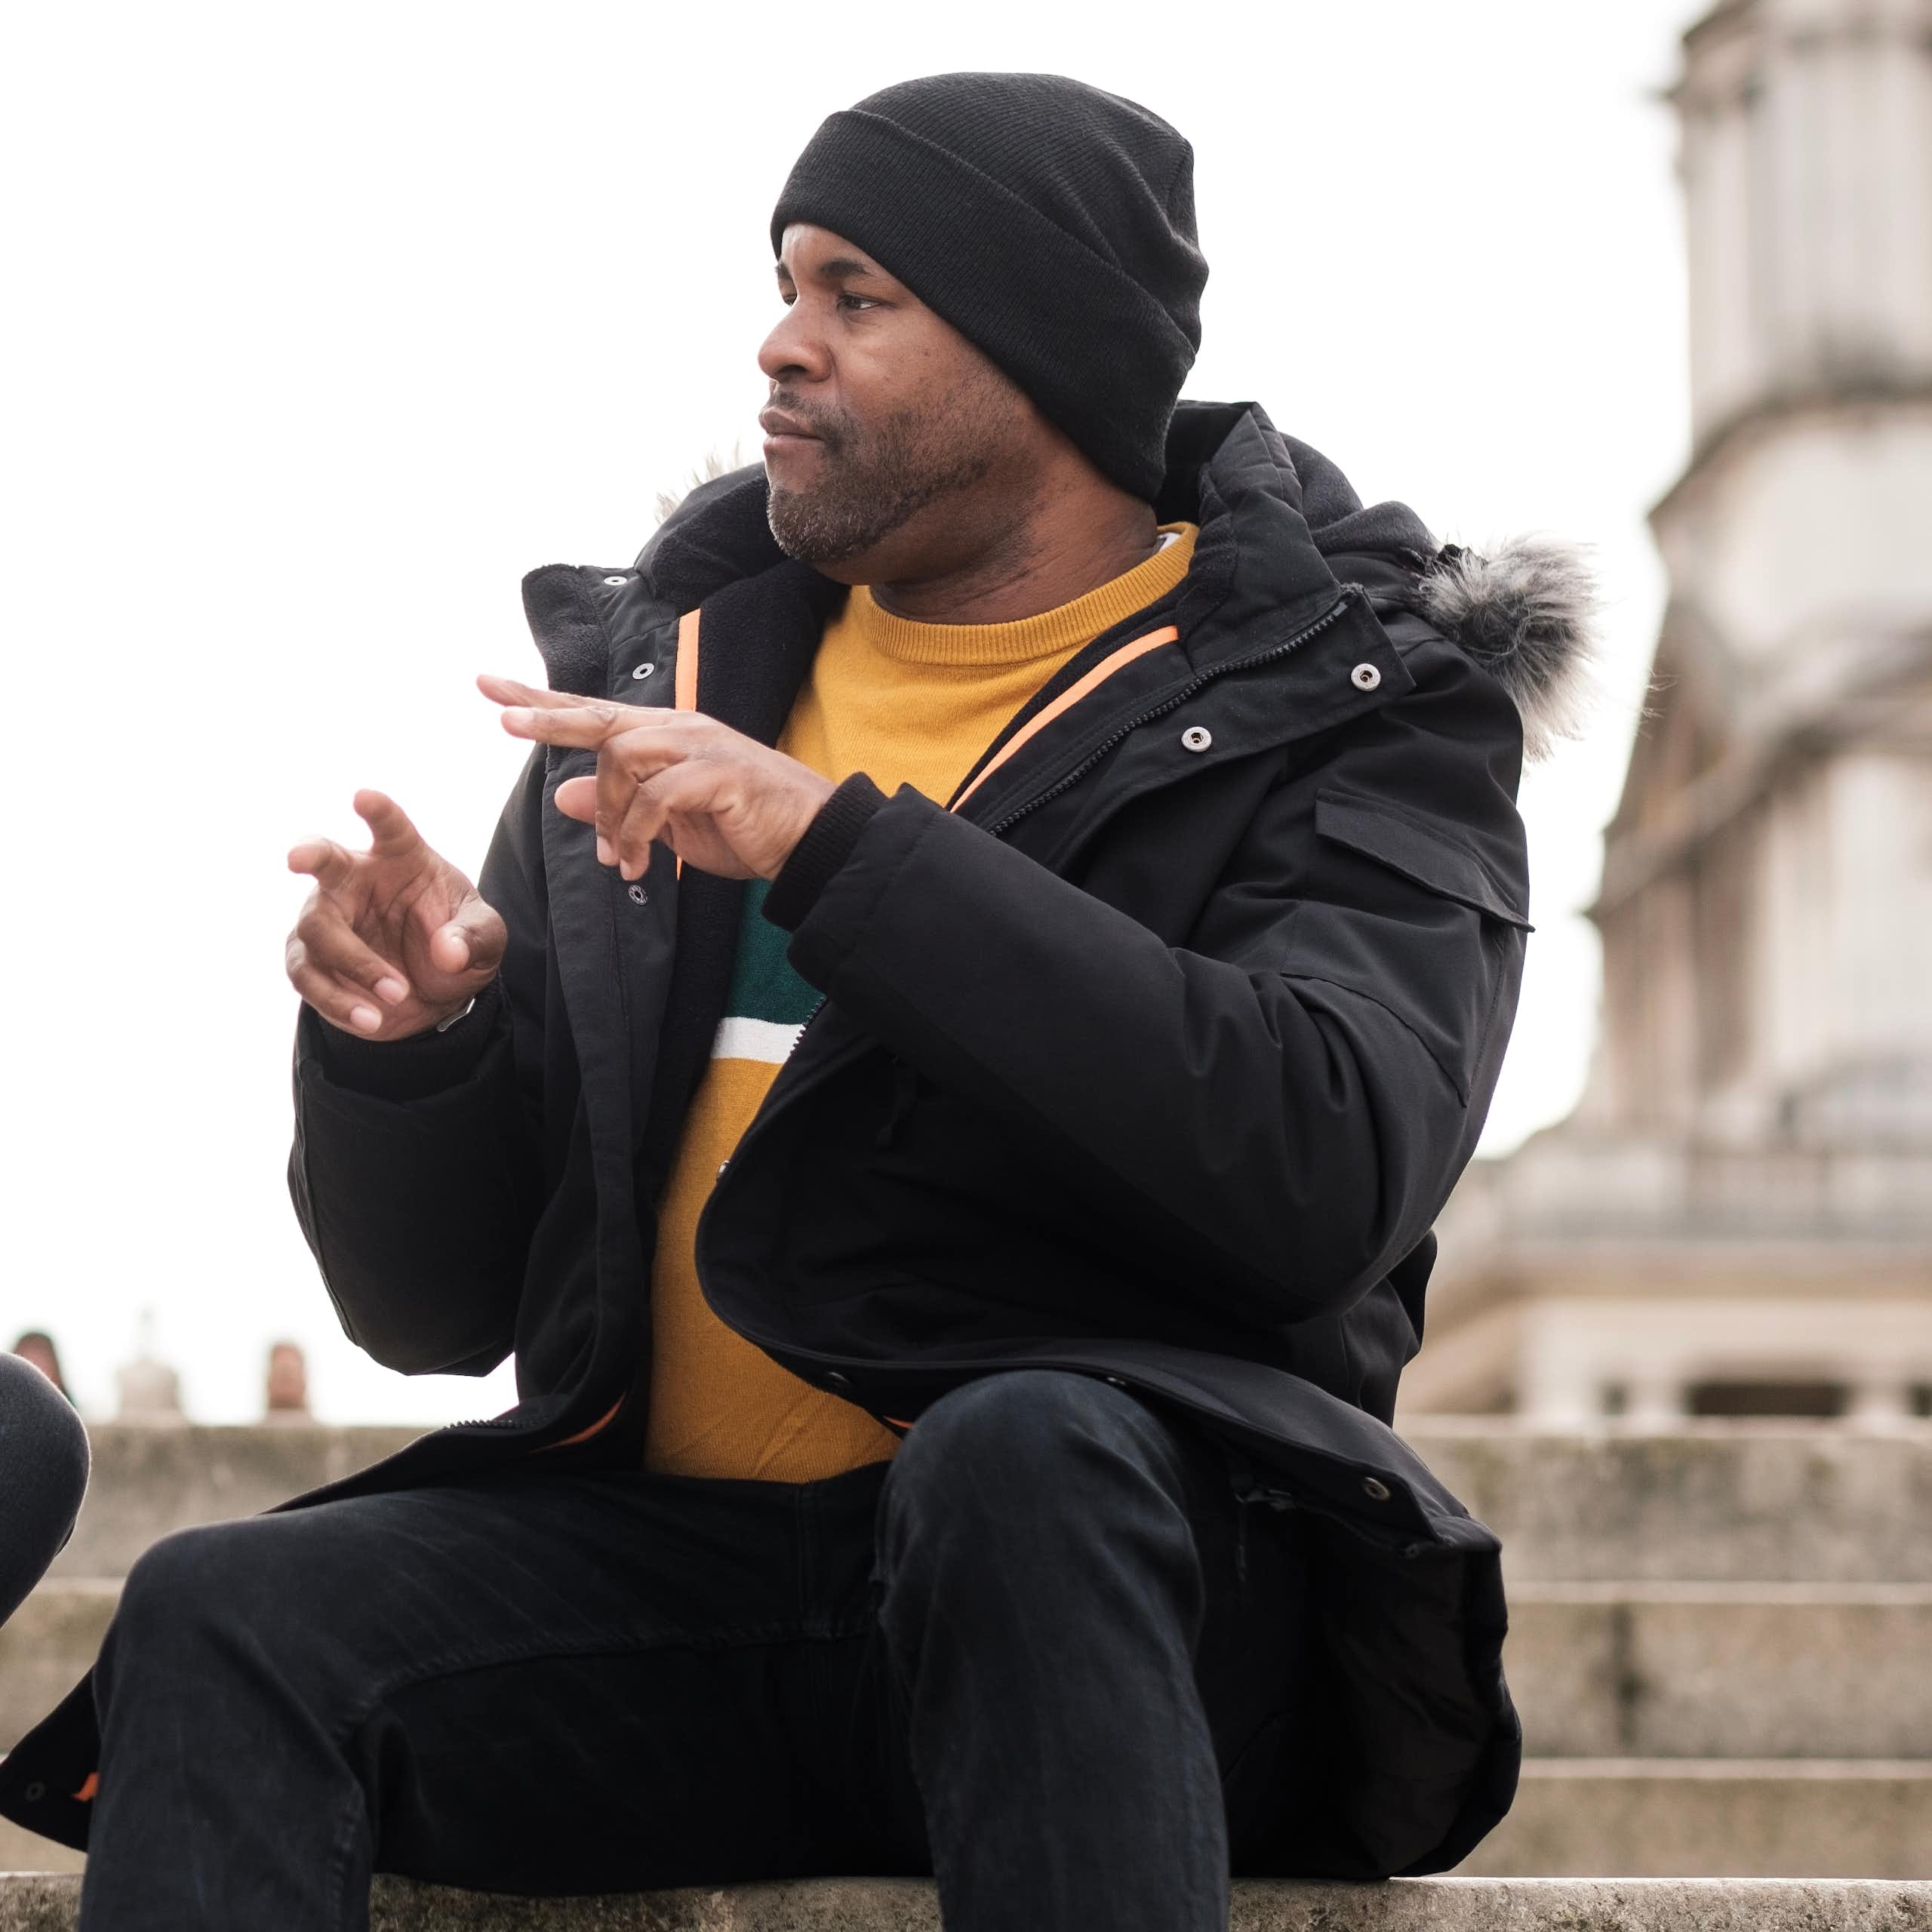 Two friends dressed in winter jackets and hats are sitting on a flight of stairs, talking in sign language